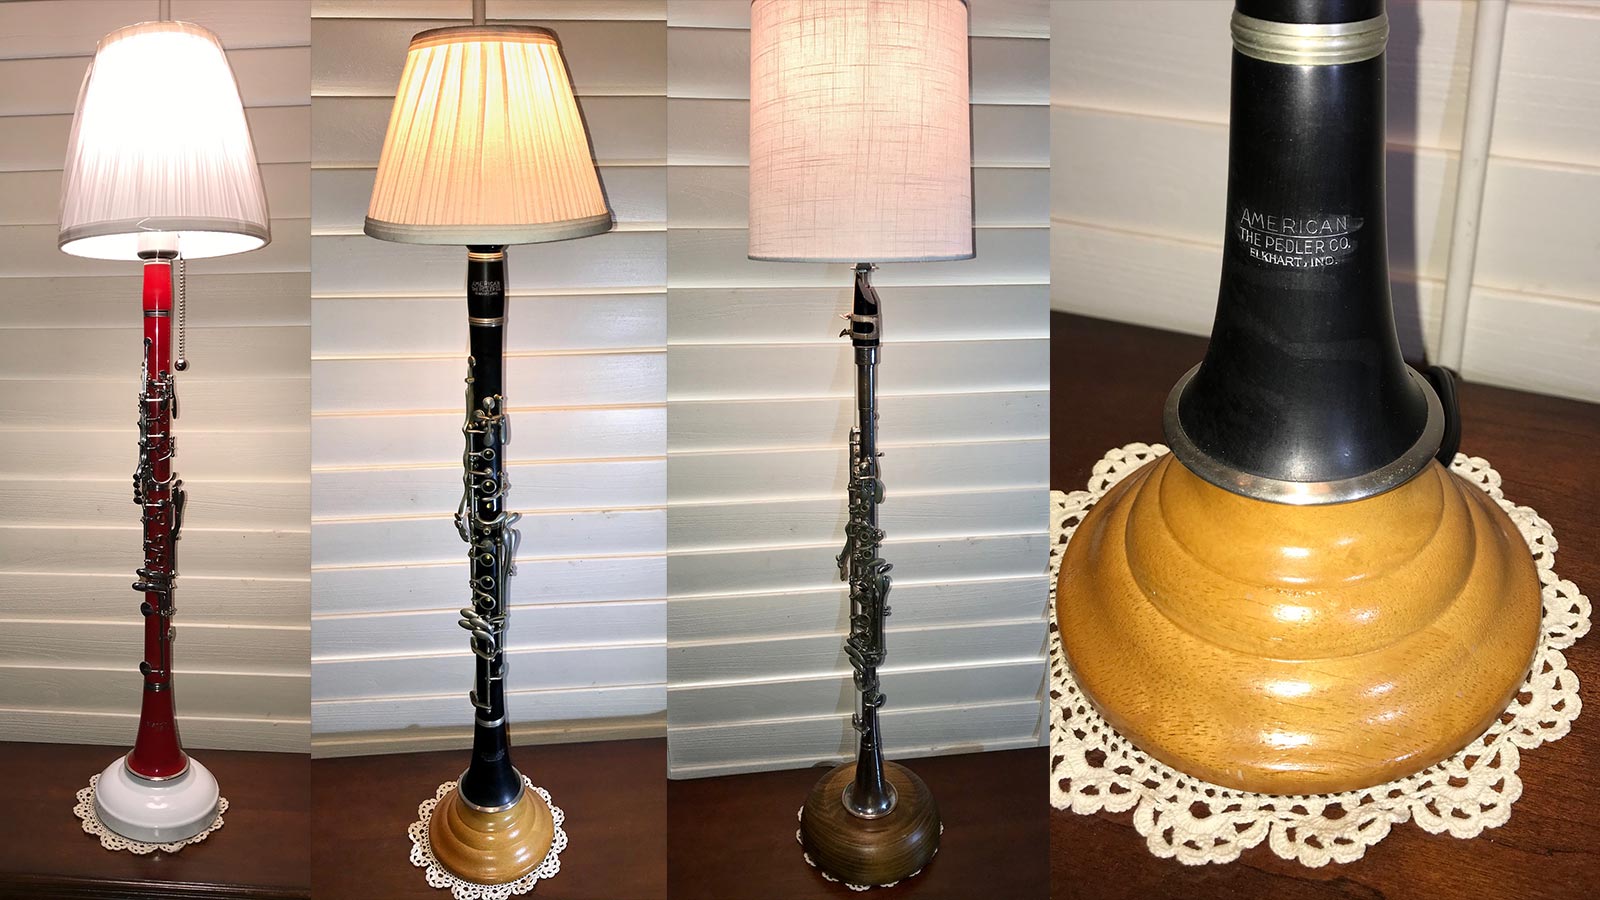 Photo of a clarinet repurposed into a lamp